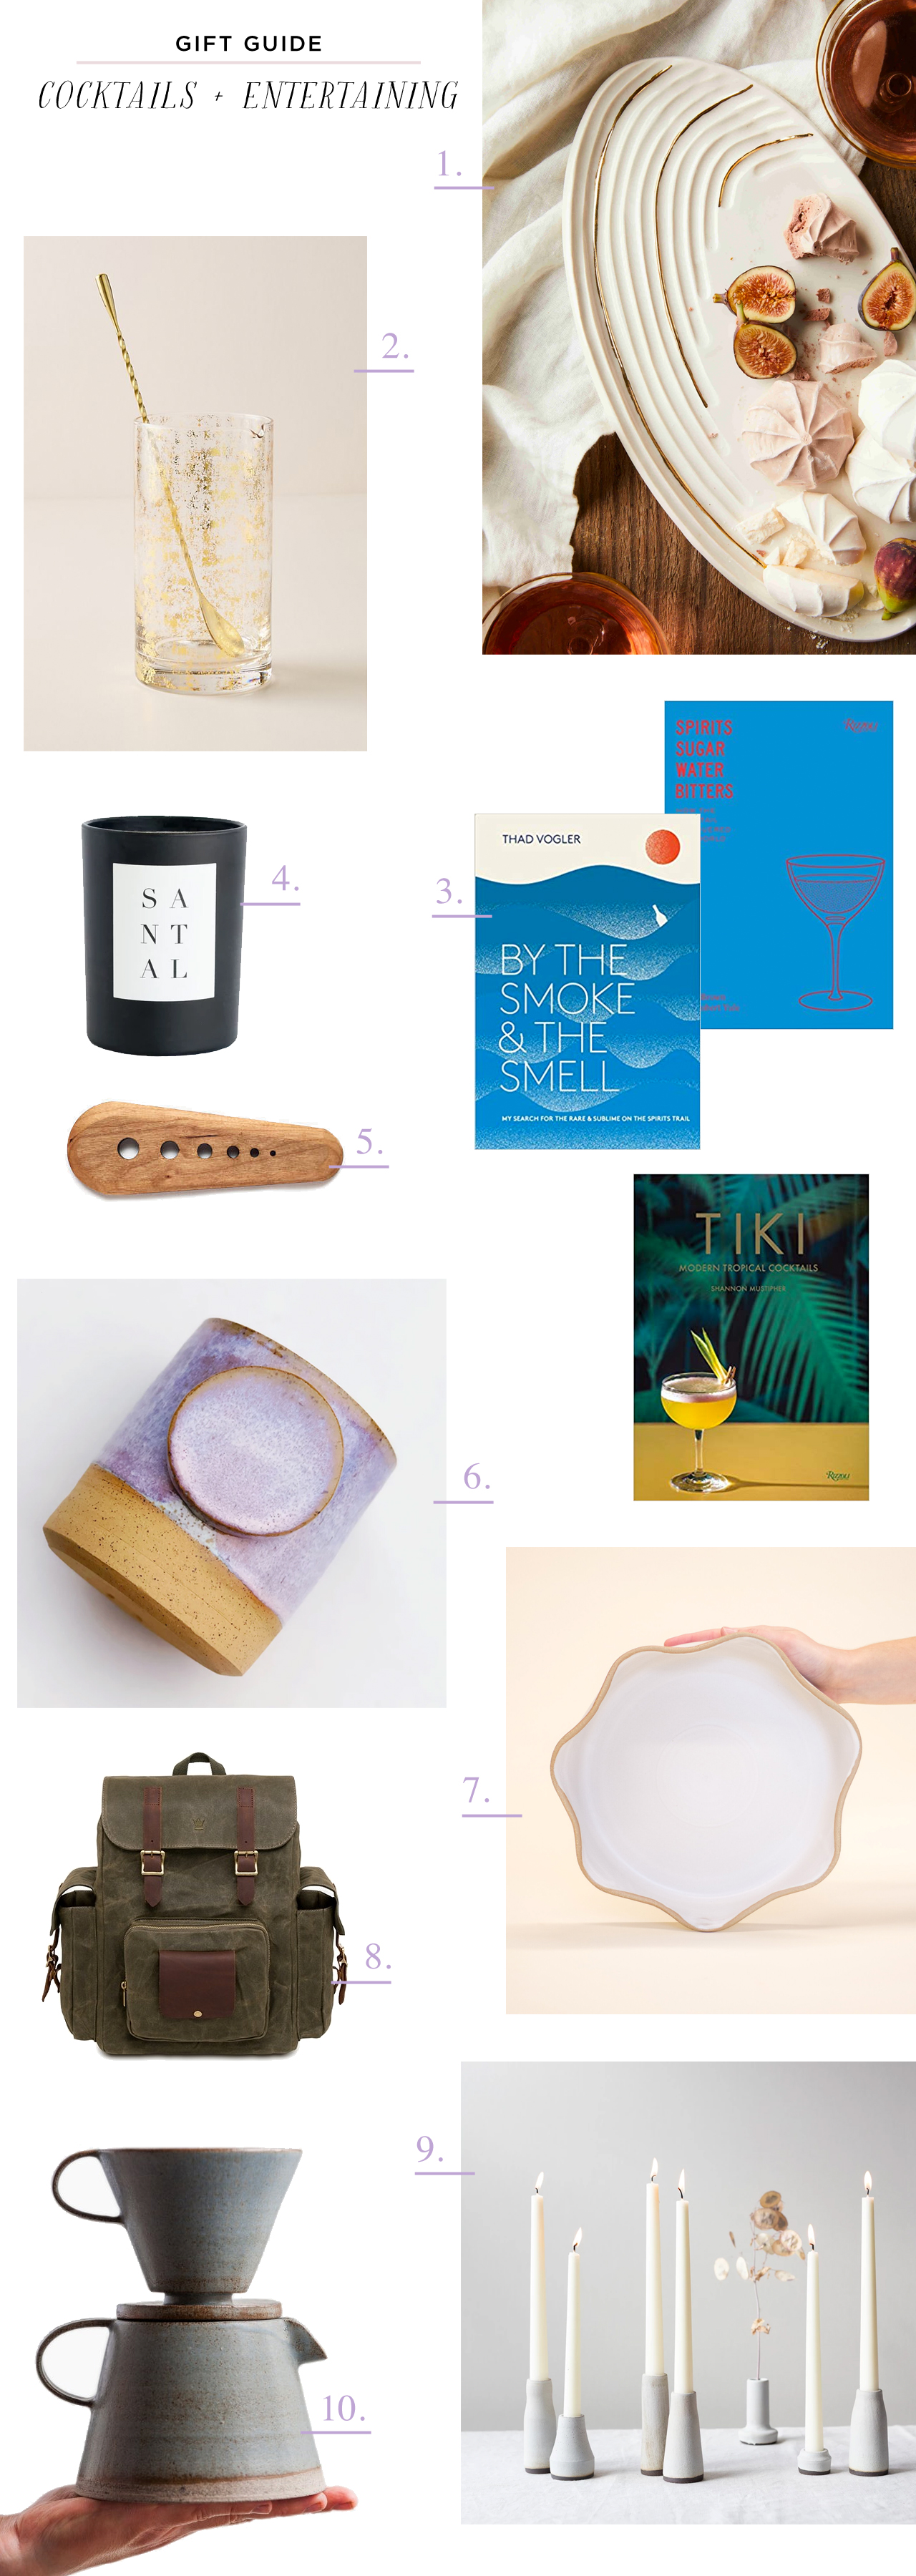 2019 Gift Guide: Gift Ideas for Cocktails and Entertaining